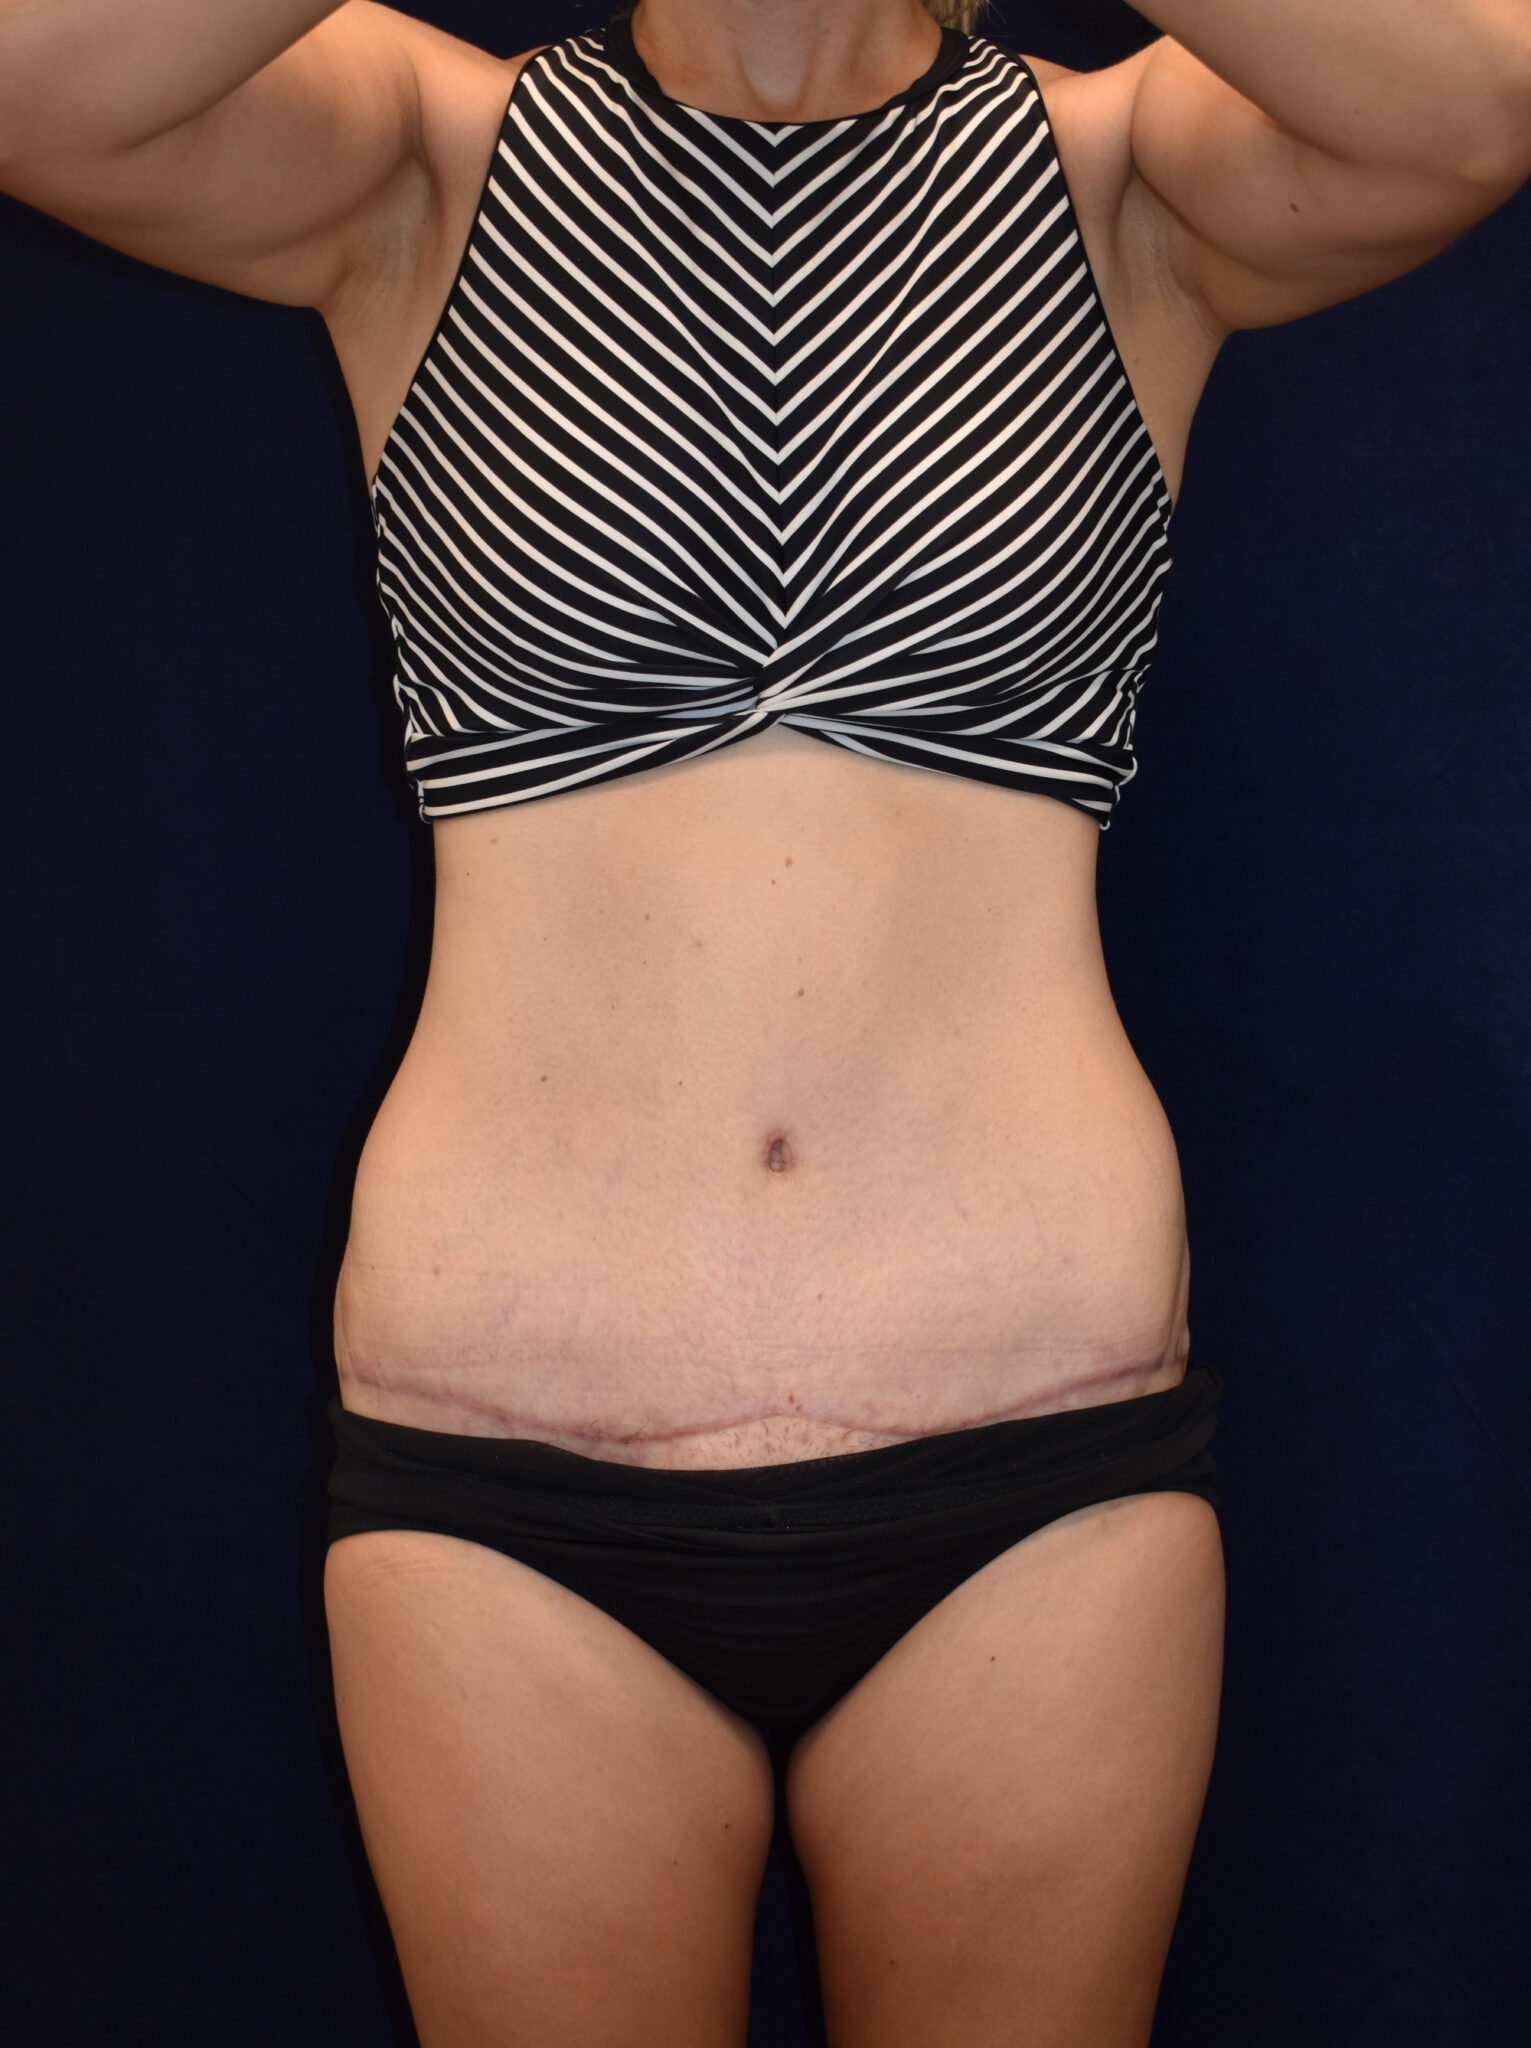 Abdominoplasty (Tummy Tuck) Patient Photo - Case 2621 - after view